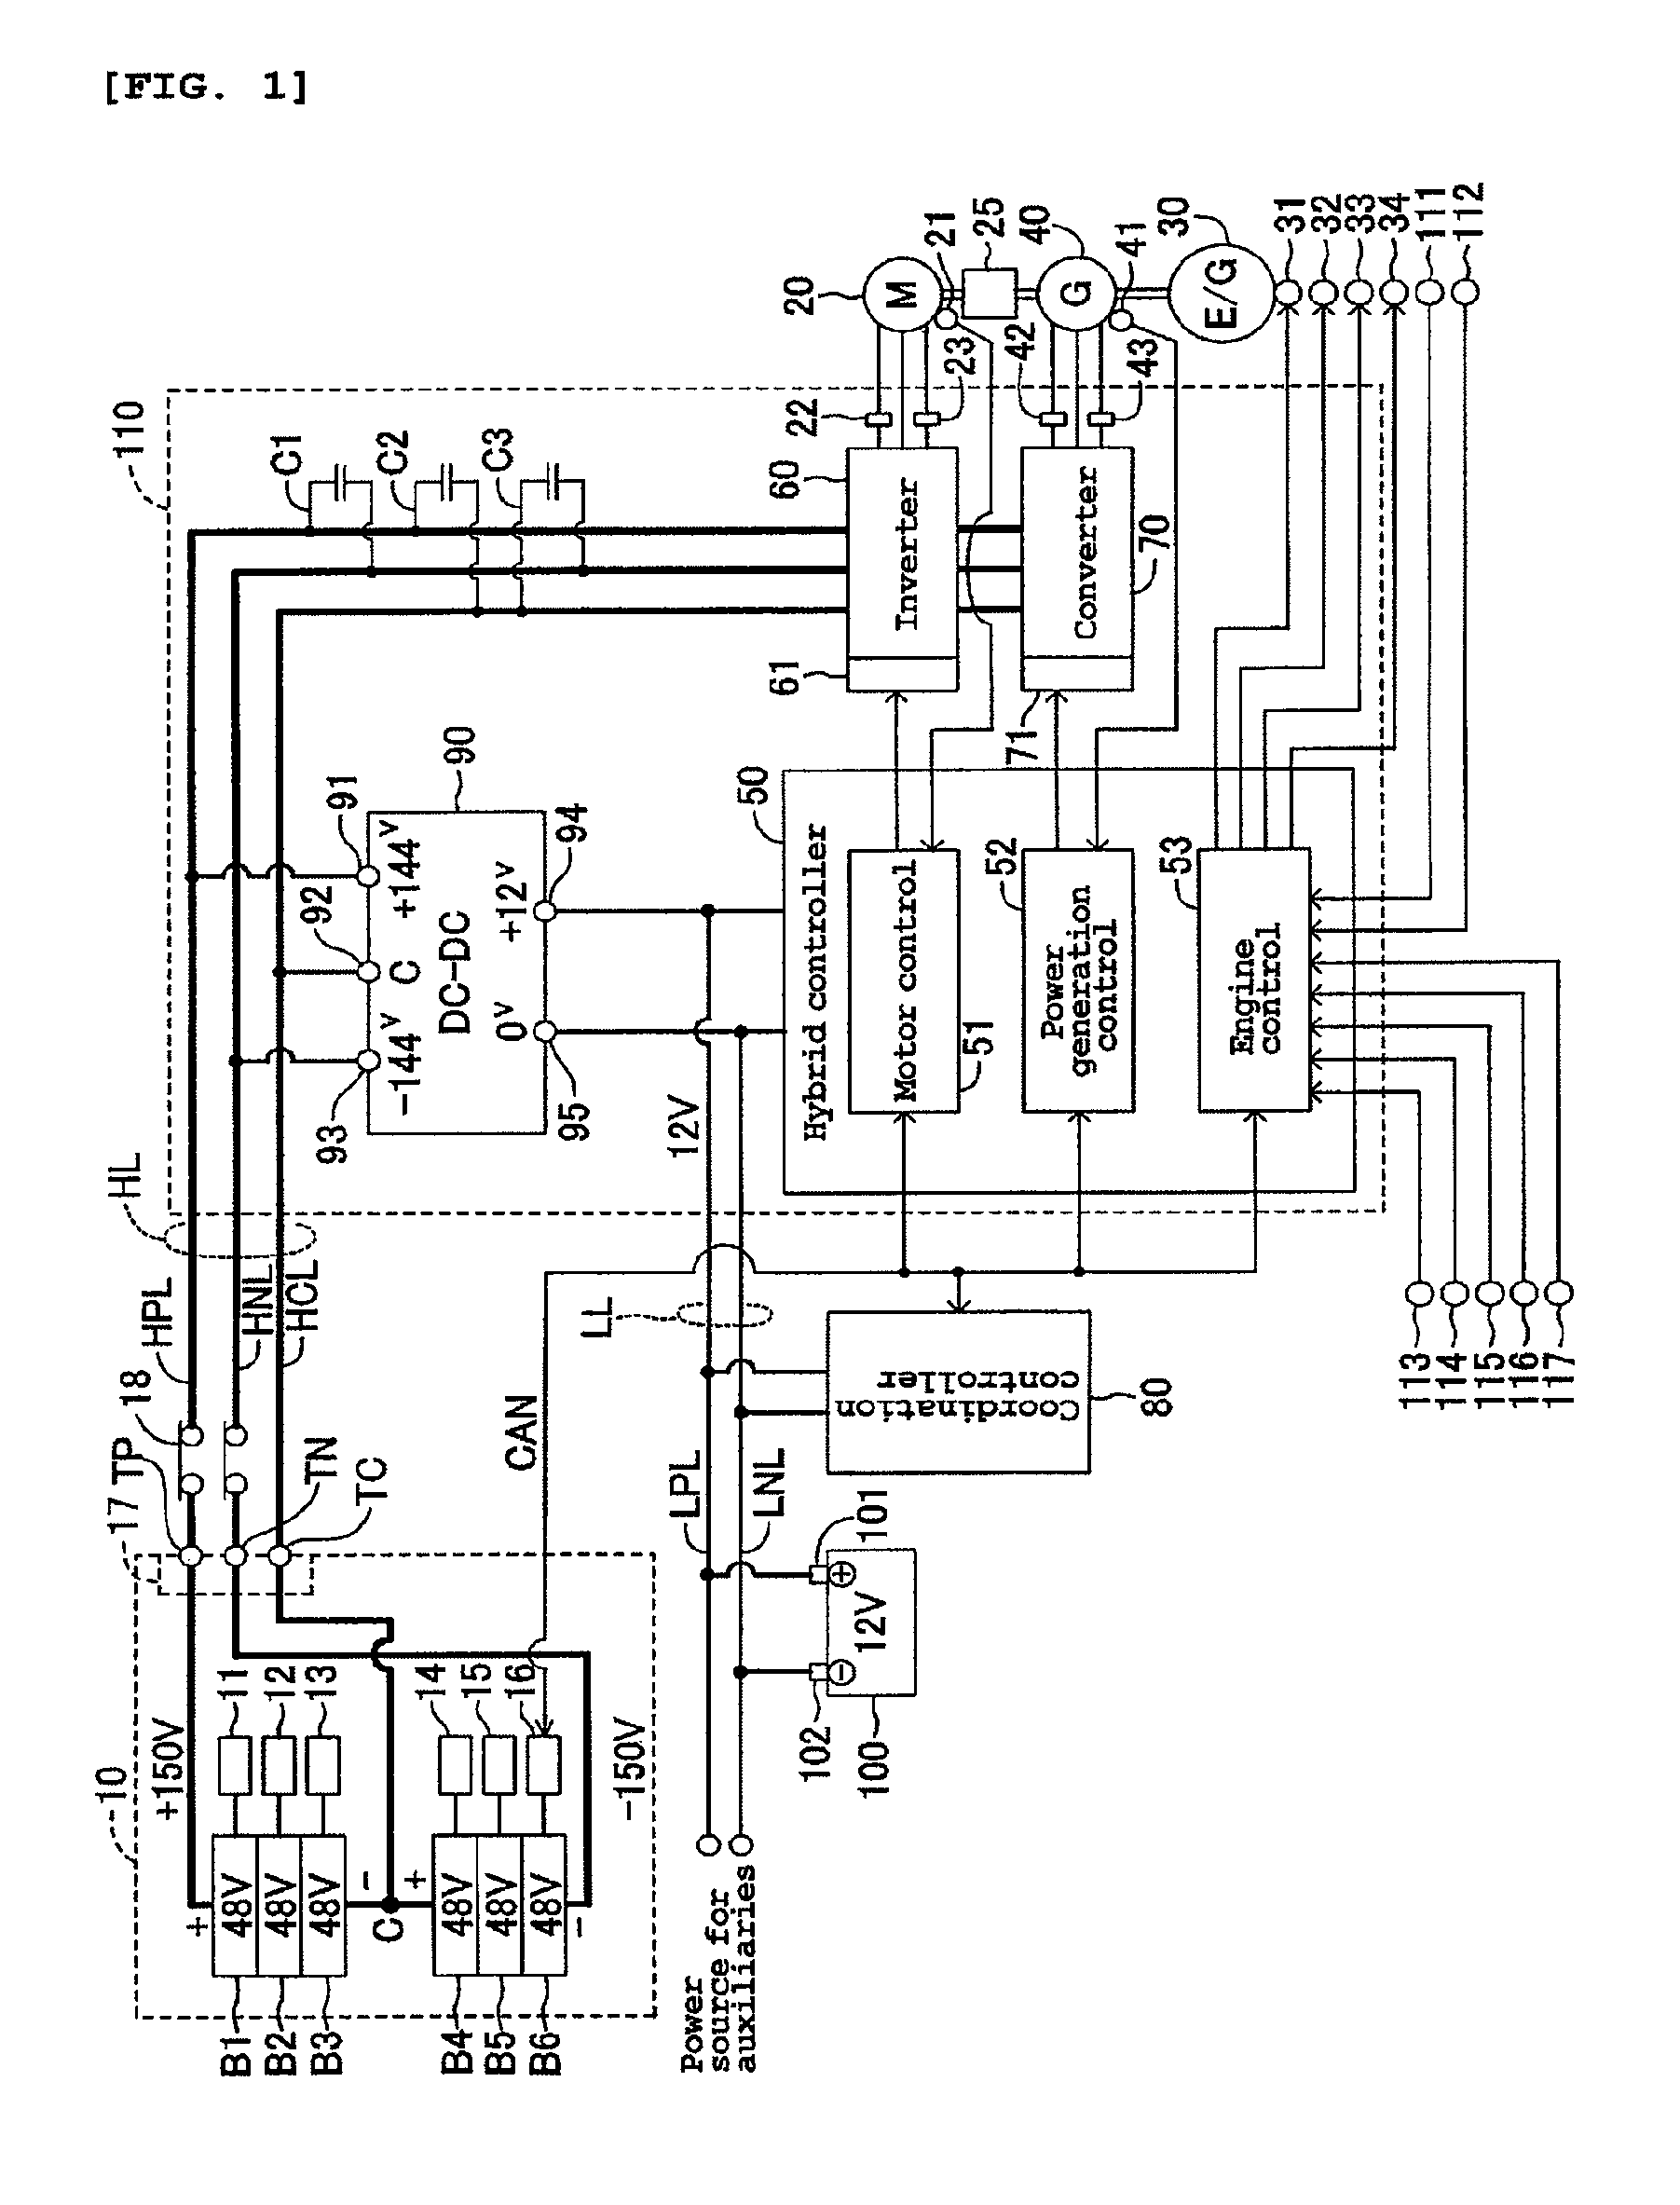 Power supply for a vehicle